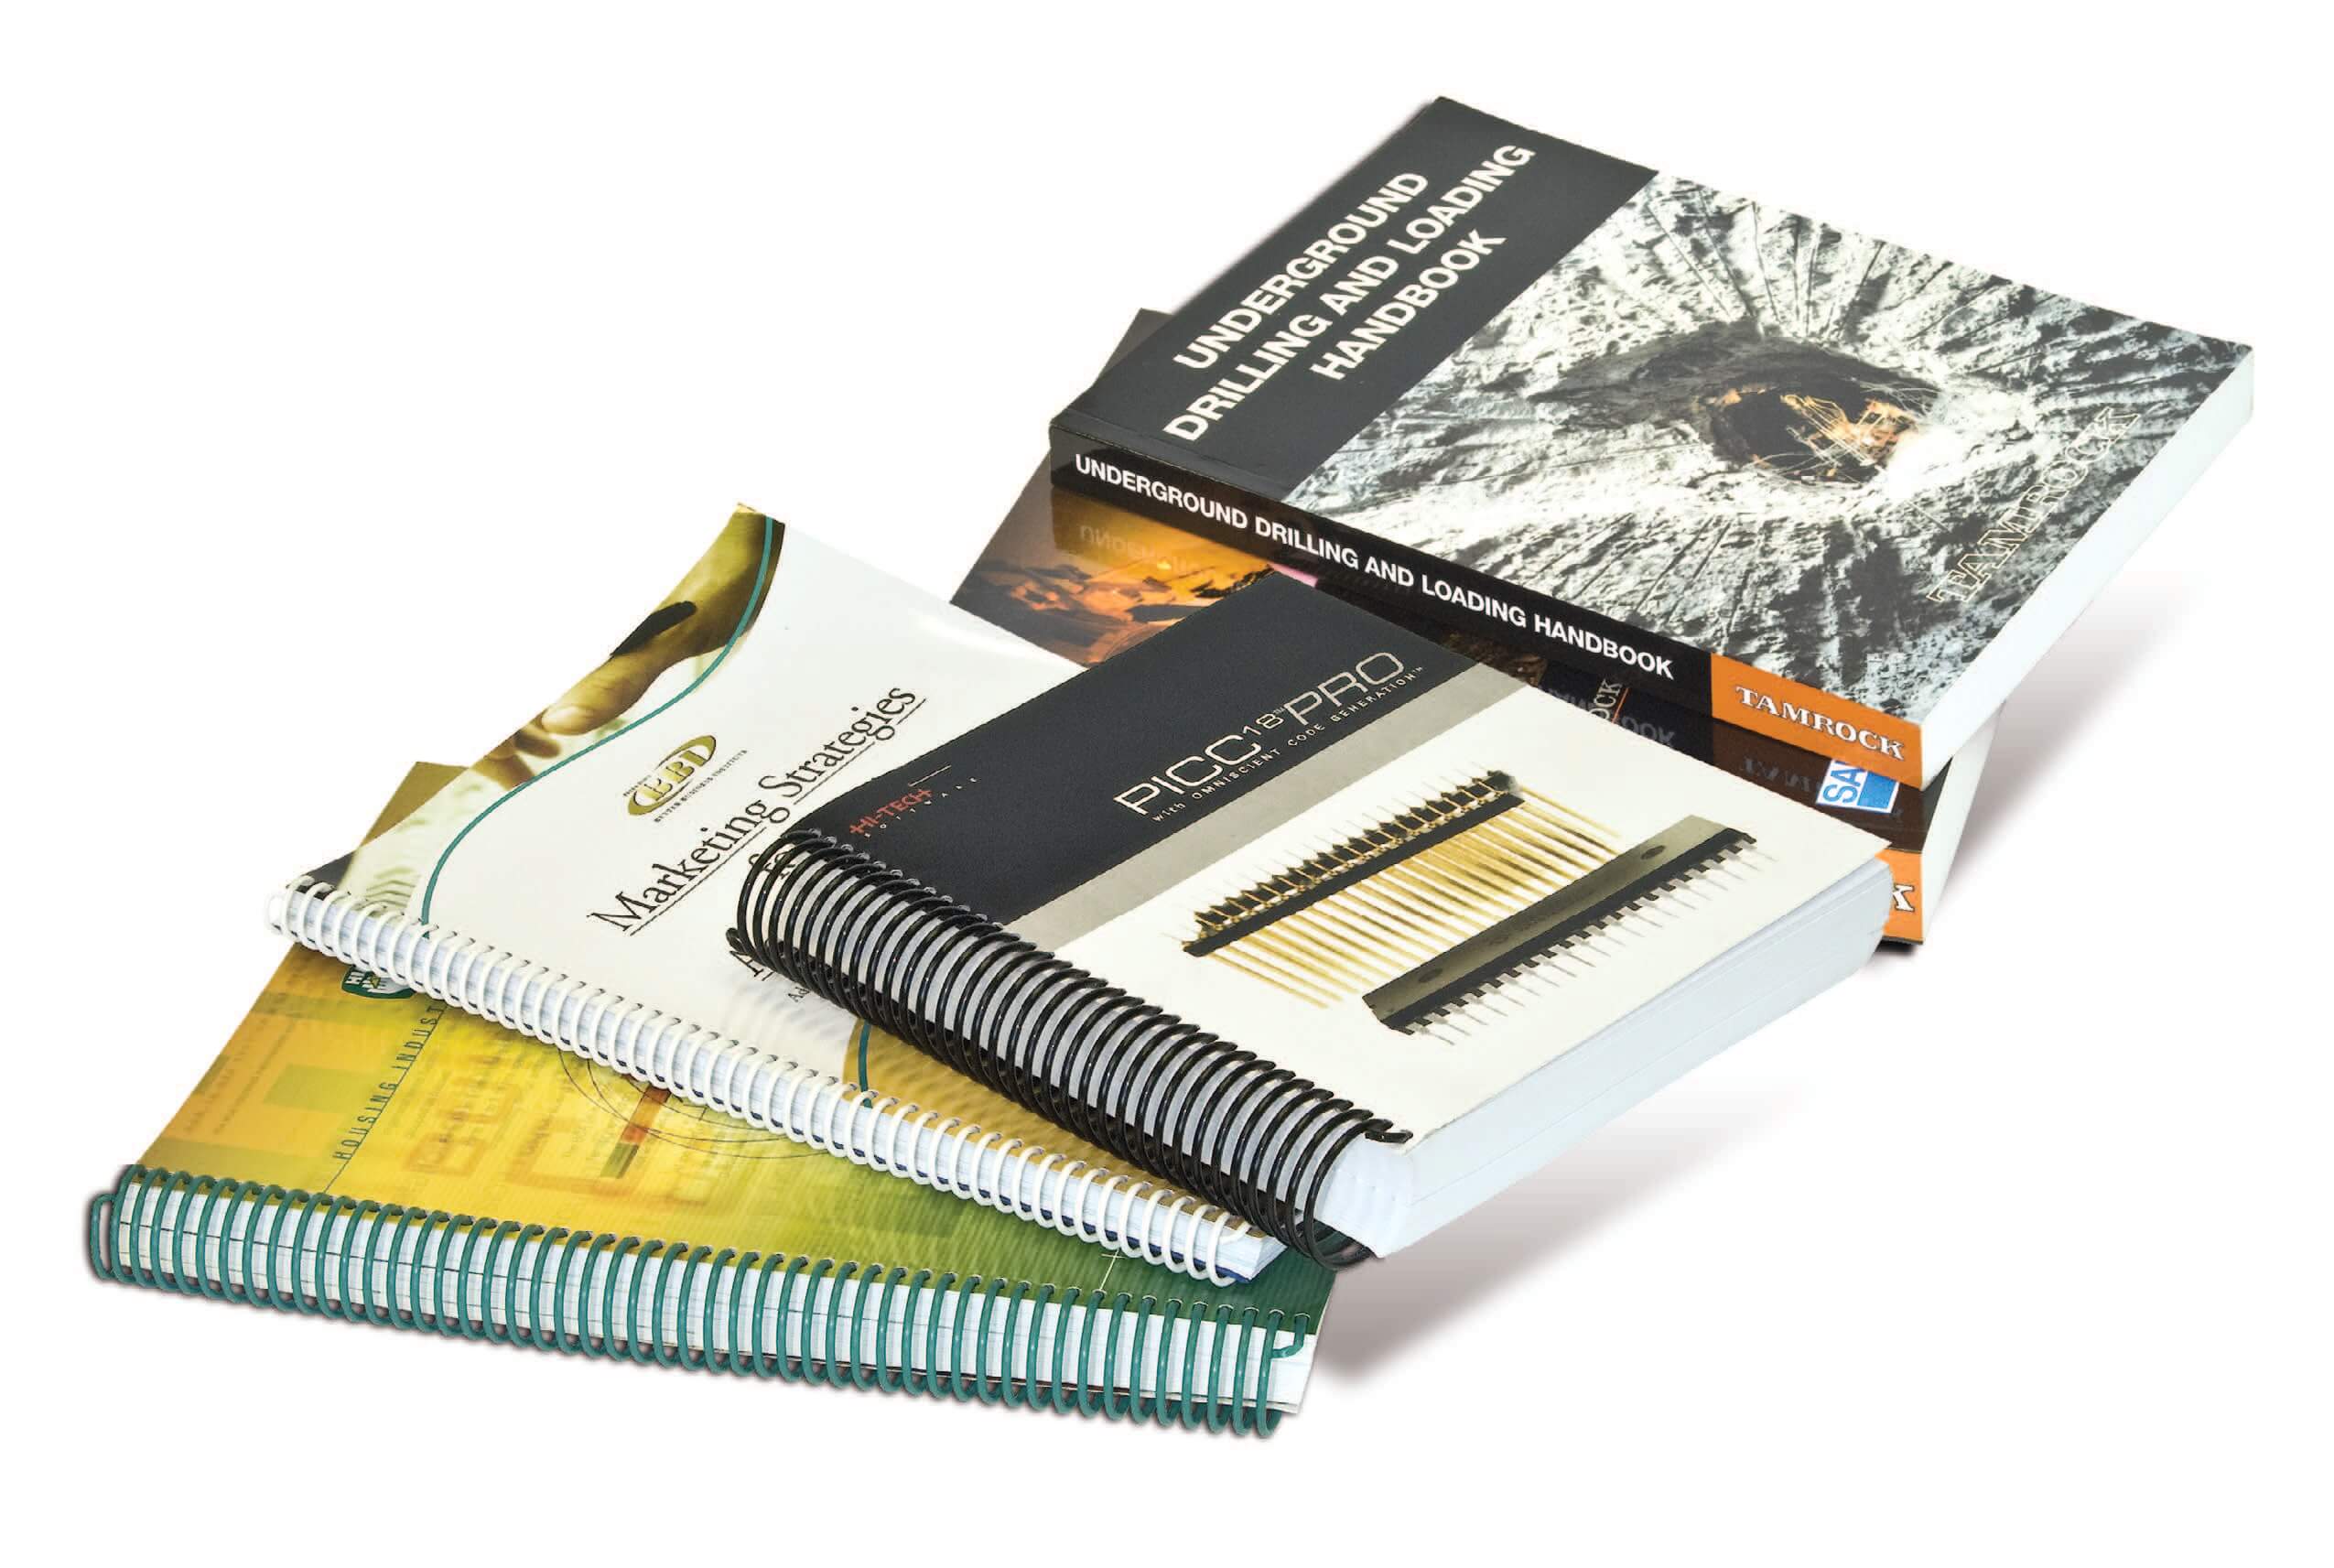 Digitally Printed textbooks and publications - Bayfield Printing